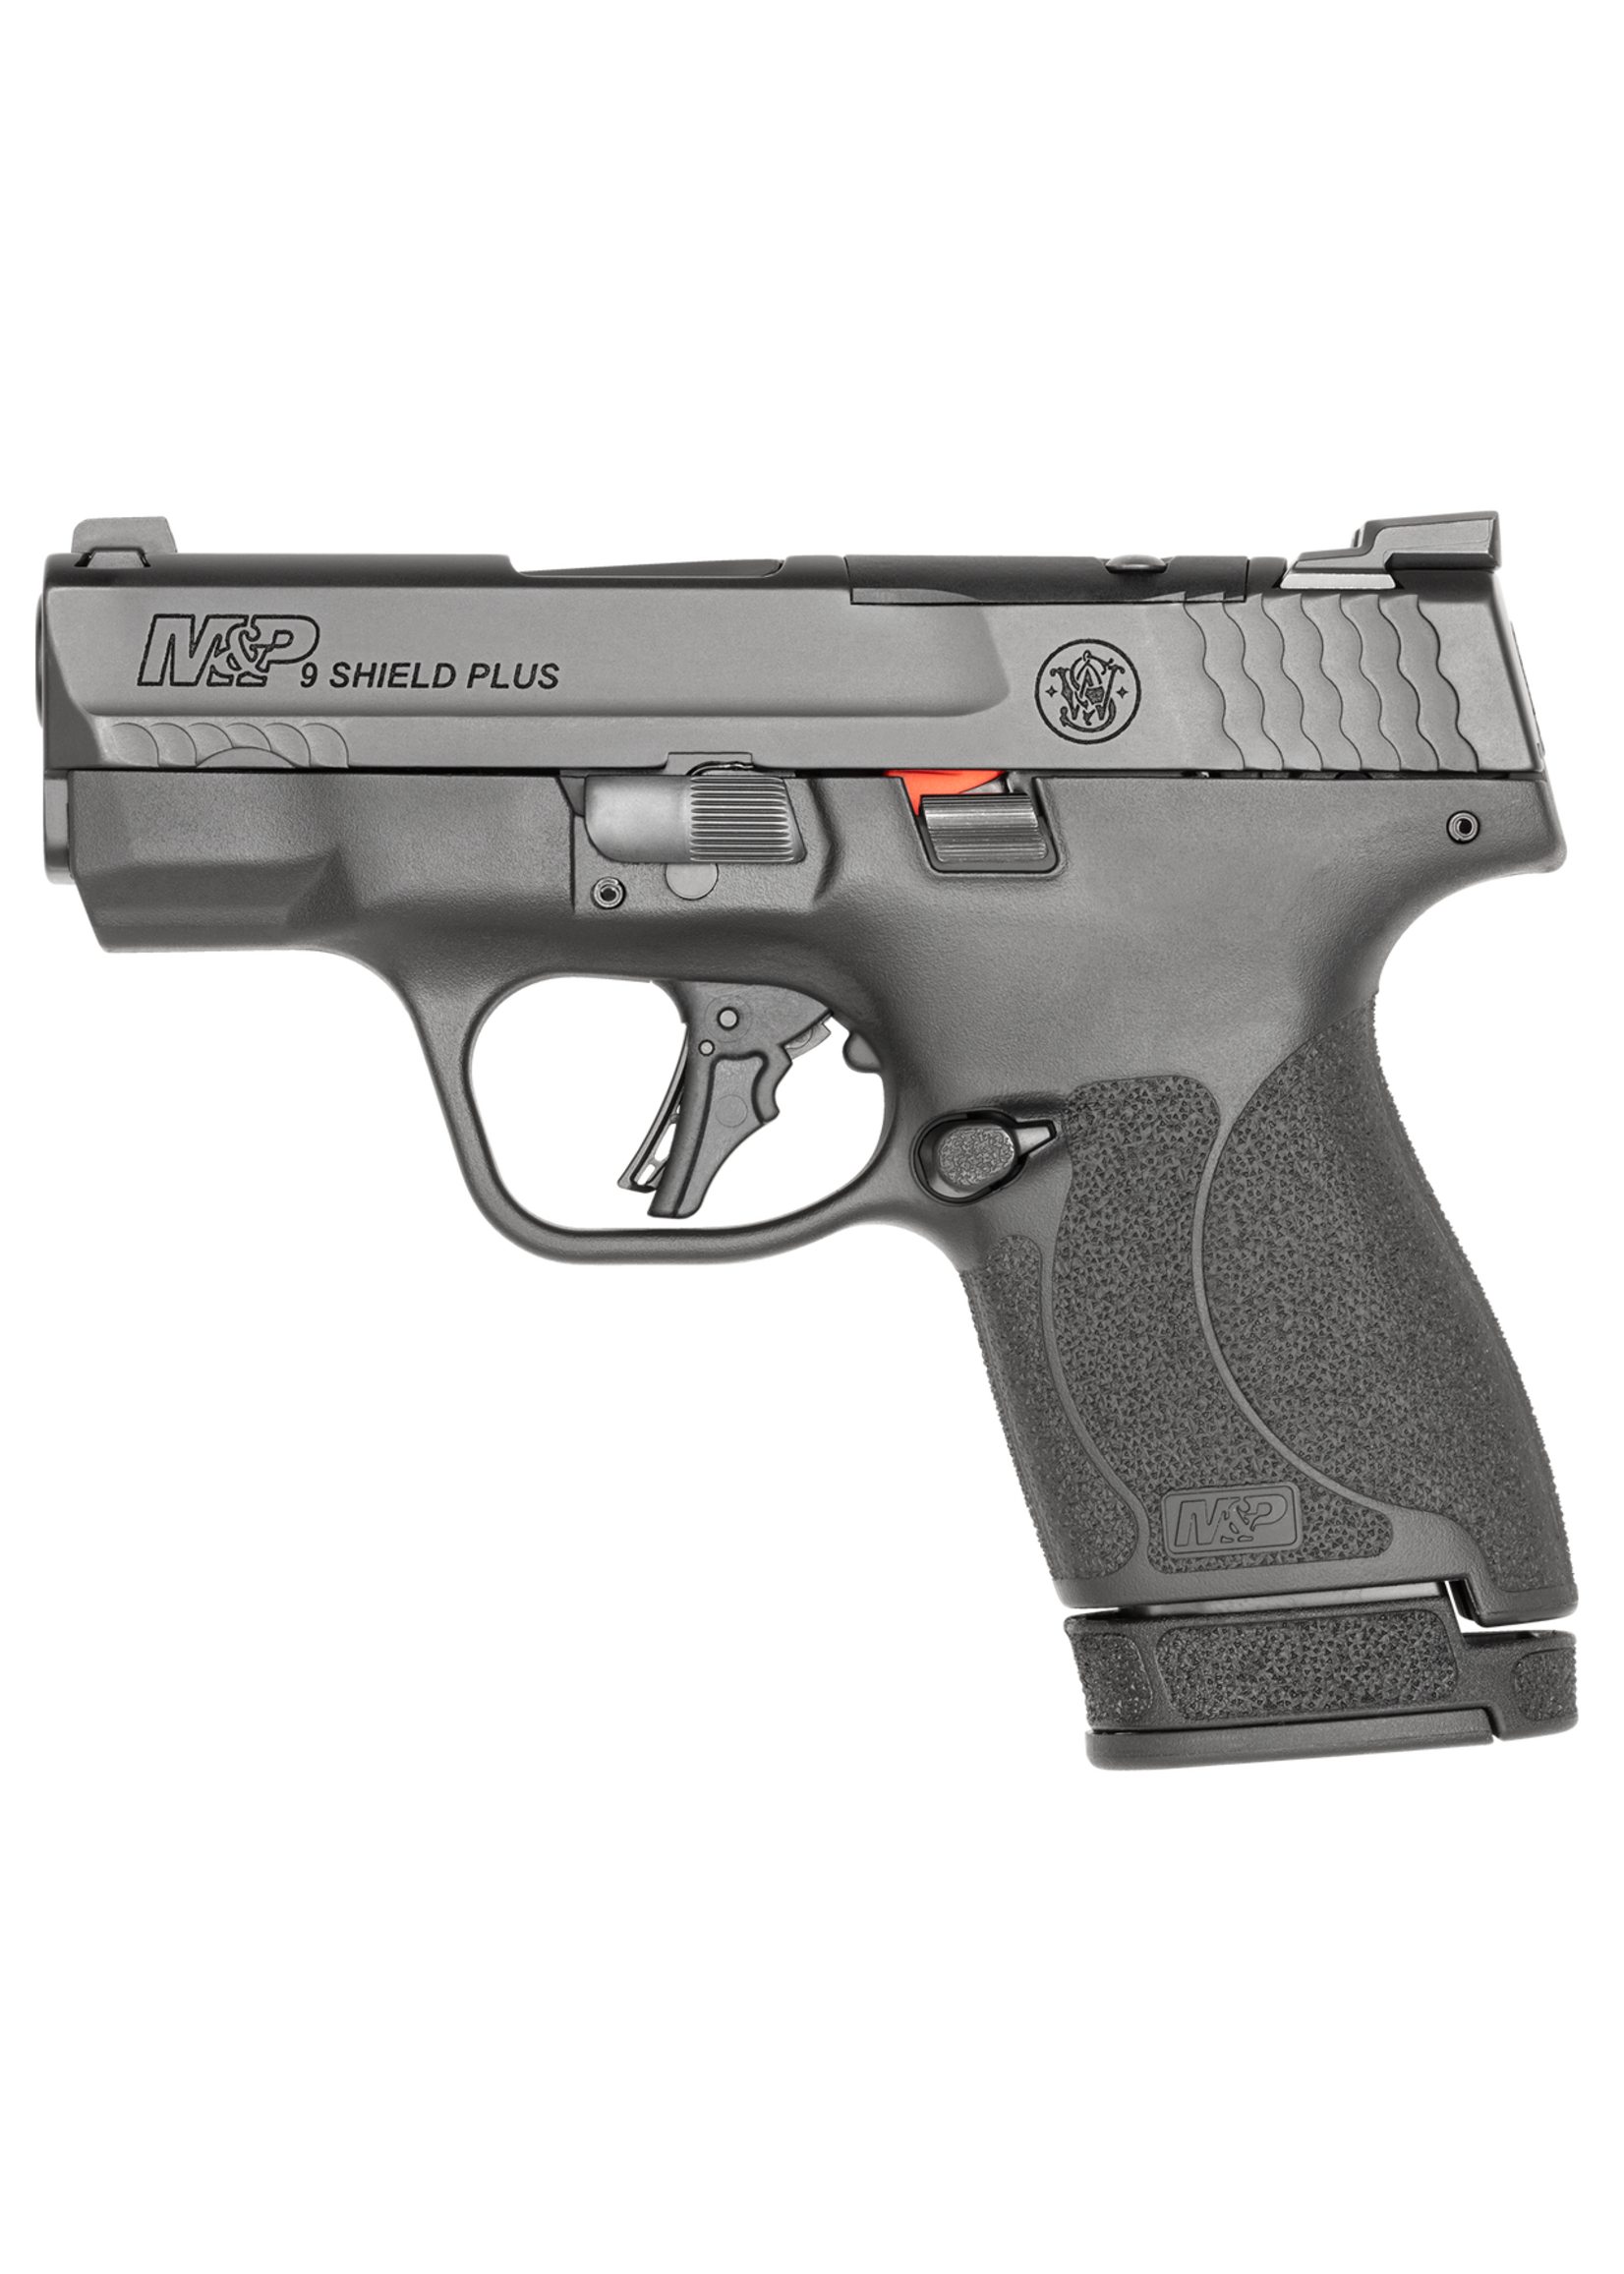 SMITH & WESSON SMITH & WESSON M&P9 SHIELD PLUS OR 9MM 13RD 3.1"